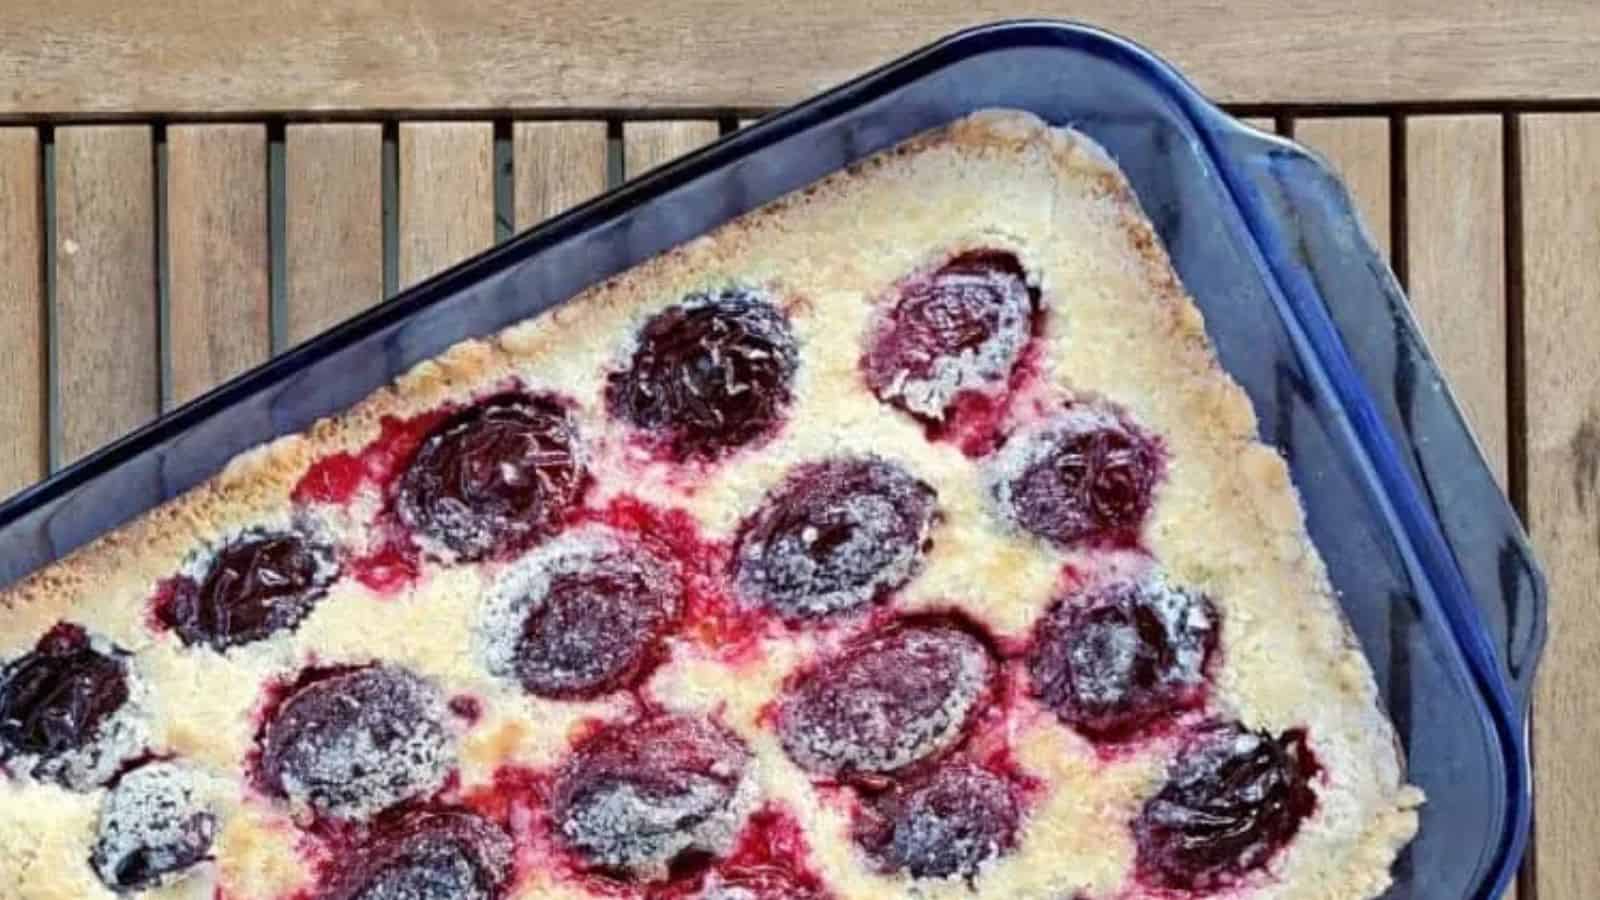 Image shows an overhead shot of German Plum Kuchen in a blue pyrex pan on a wooden table.